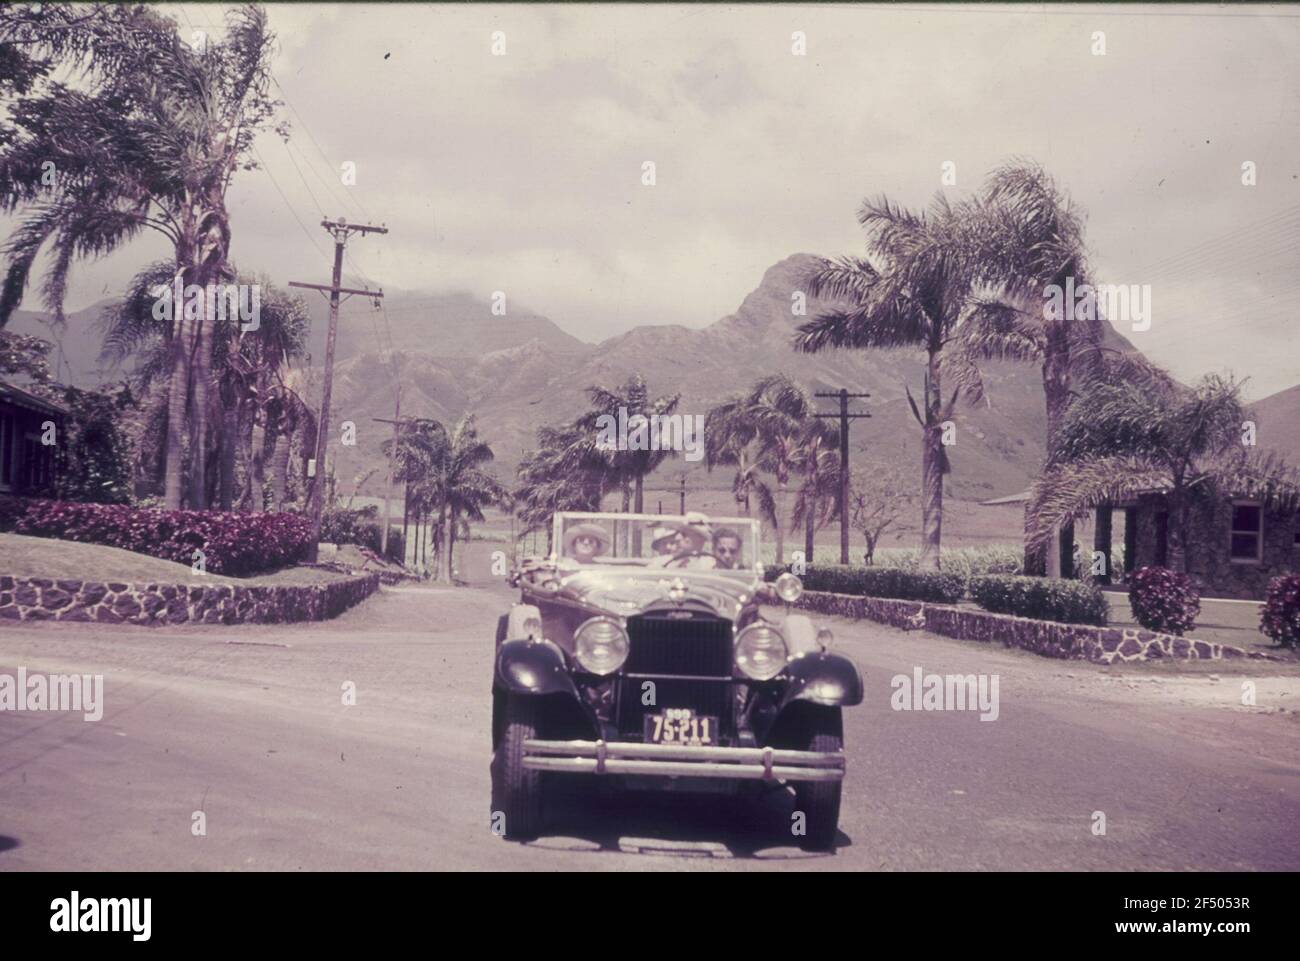 Travel photos. Automotive with left control (car no. S 99 75-211) during a local passage. View to a mountain range (probably in the Spanish or French Caribbean) Stock Photo